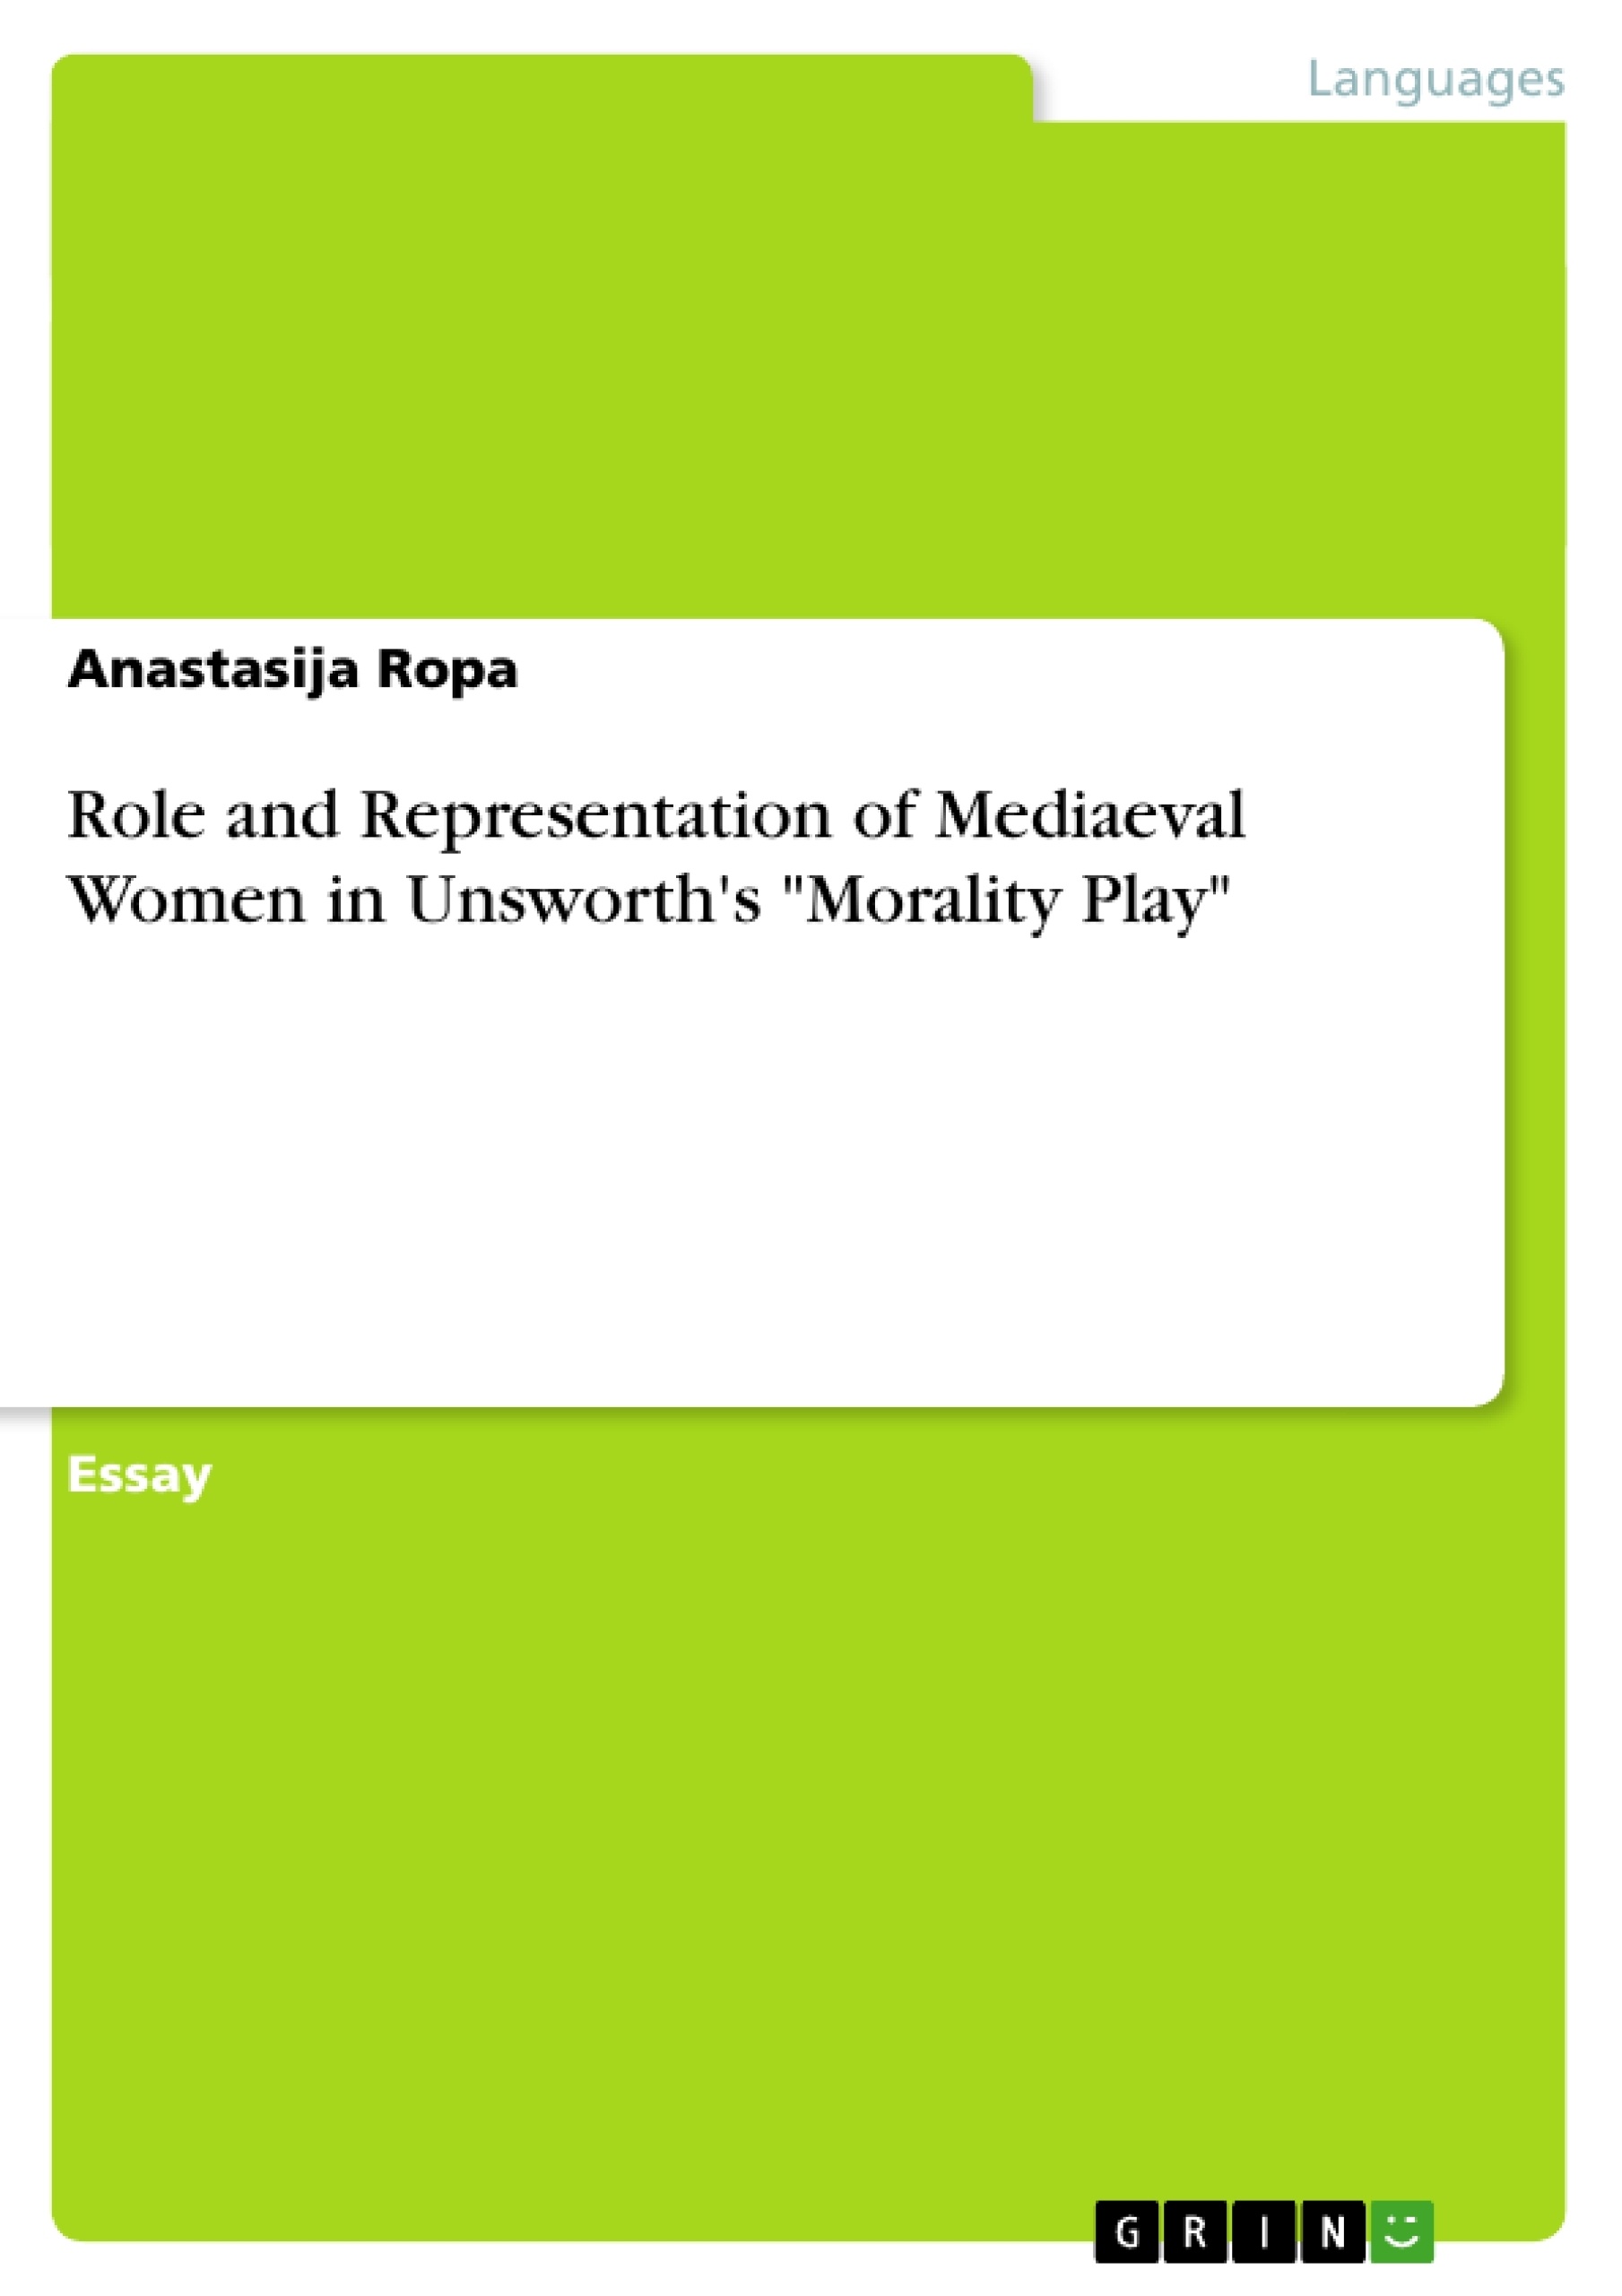 Title: Role and Representation of Mediaeval Women in Unsworth's "Morality Play"